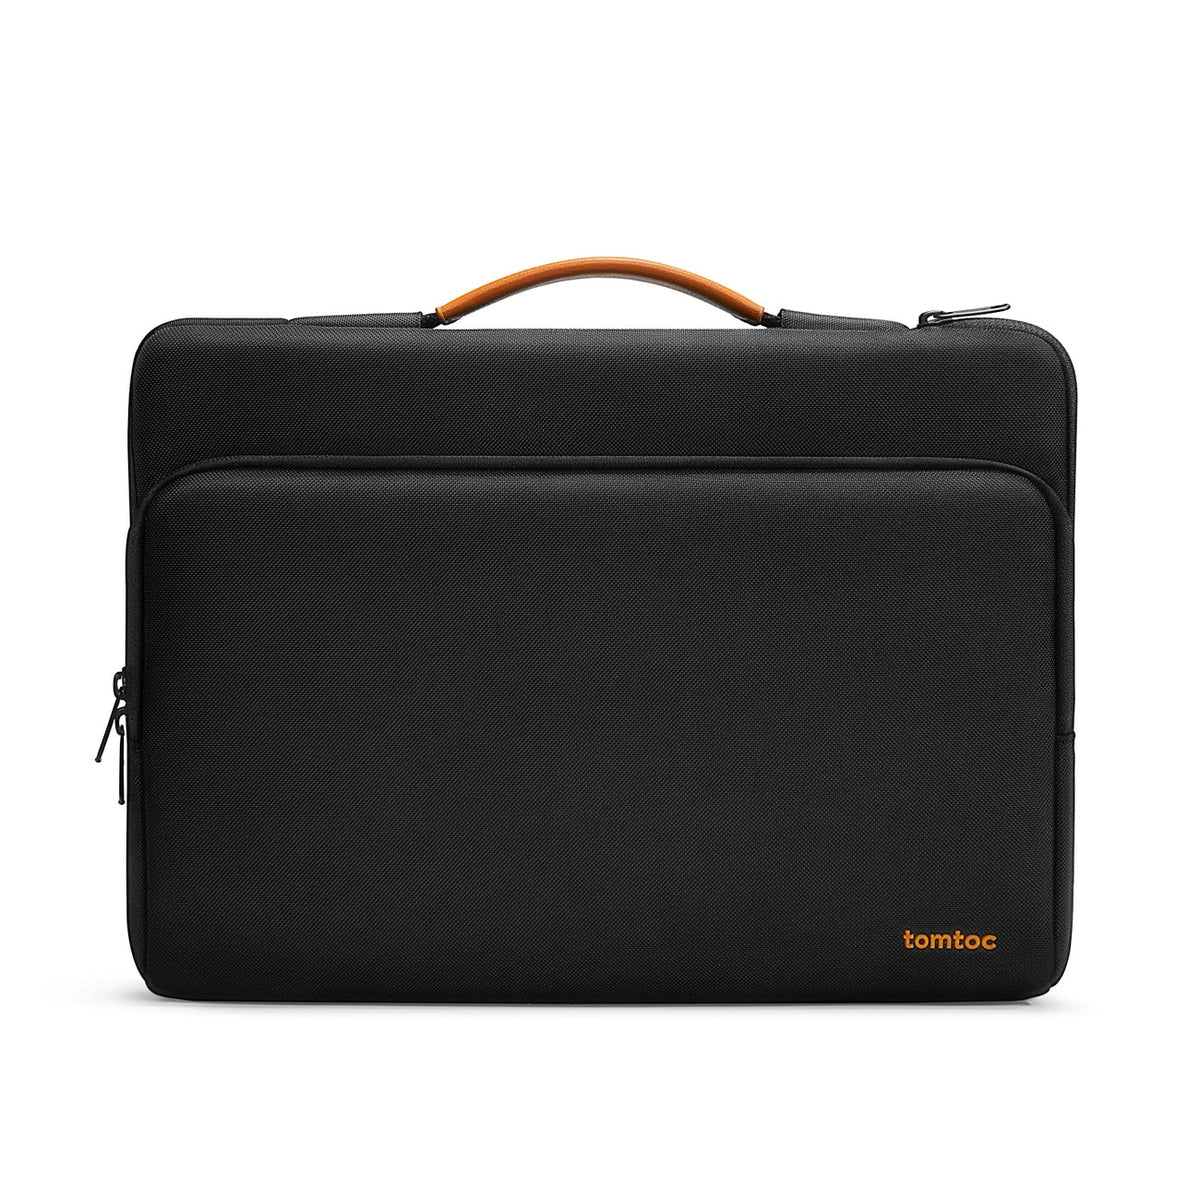 primary_Defender-A14 Laptop Briefcase For 15-inch MacBook Pro